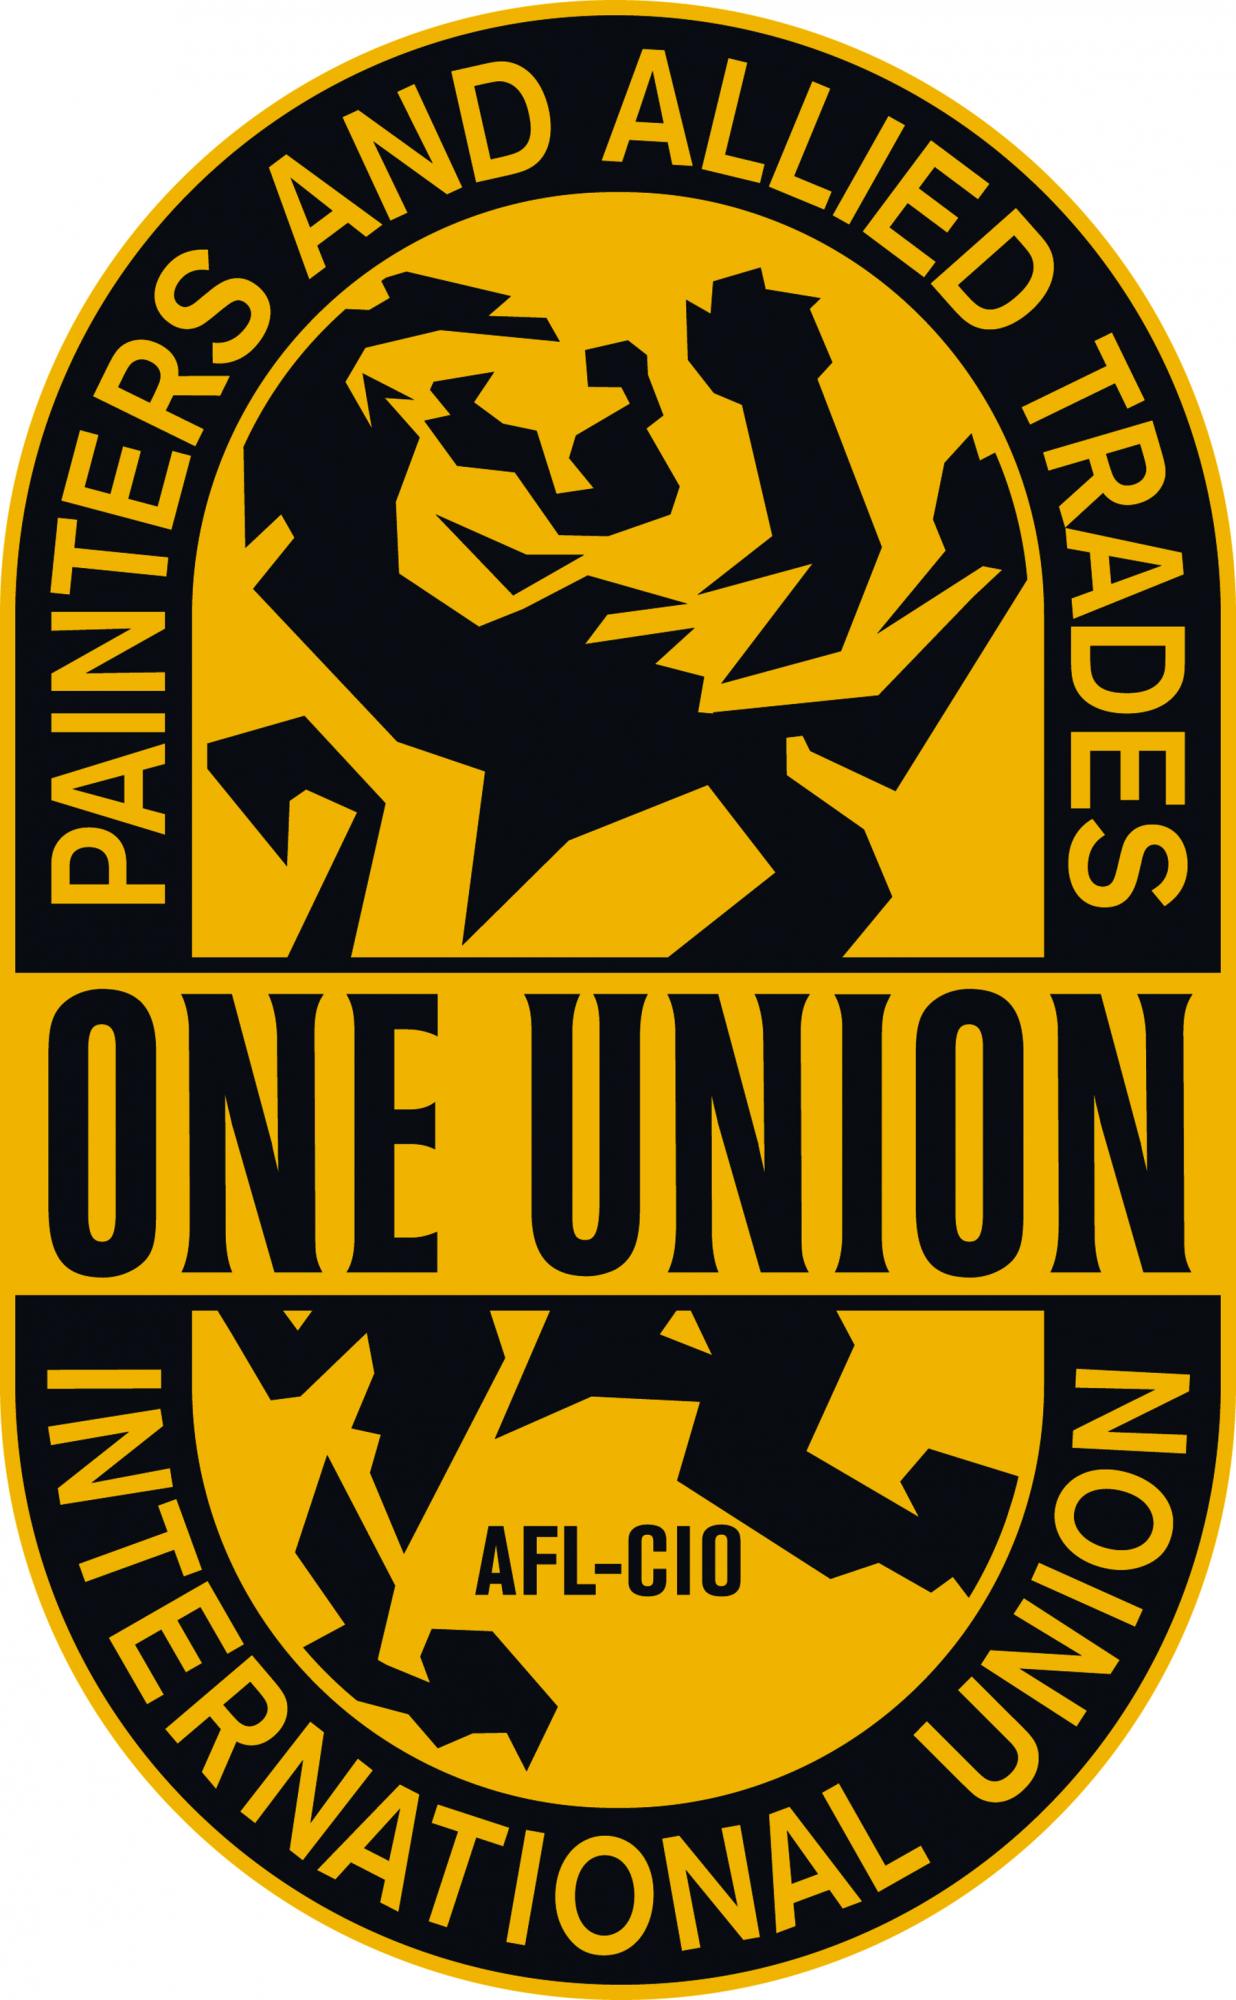 Painters and Allied Trades logo